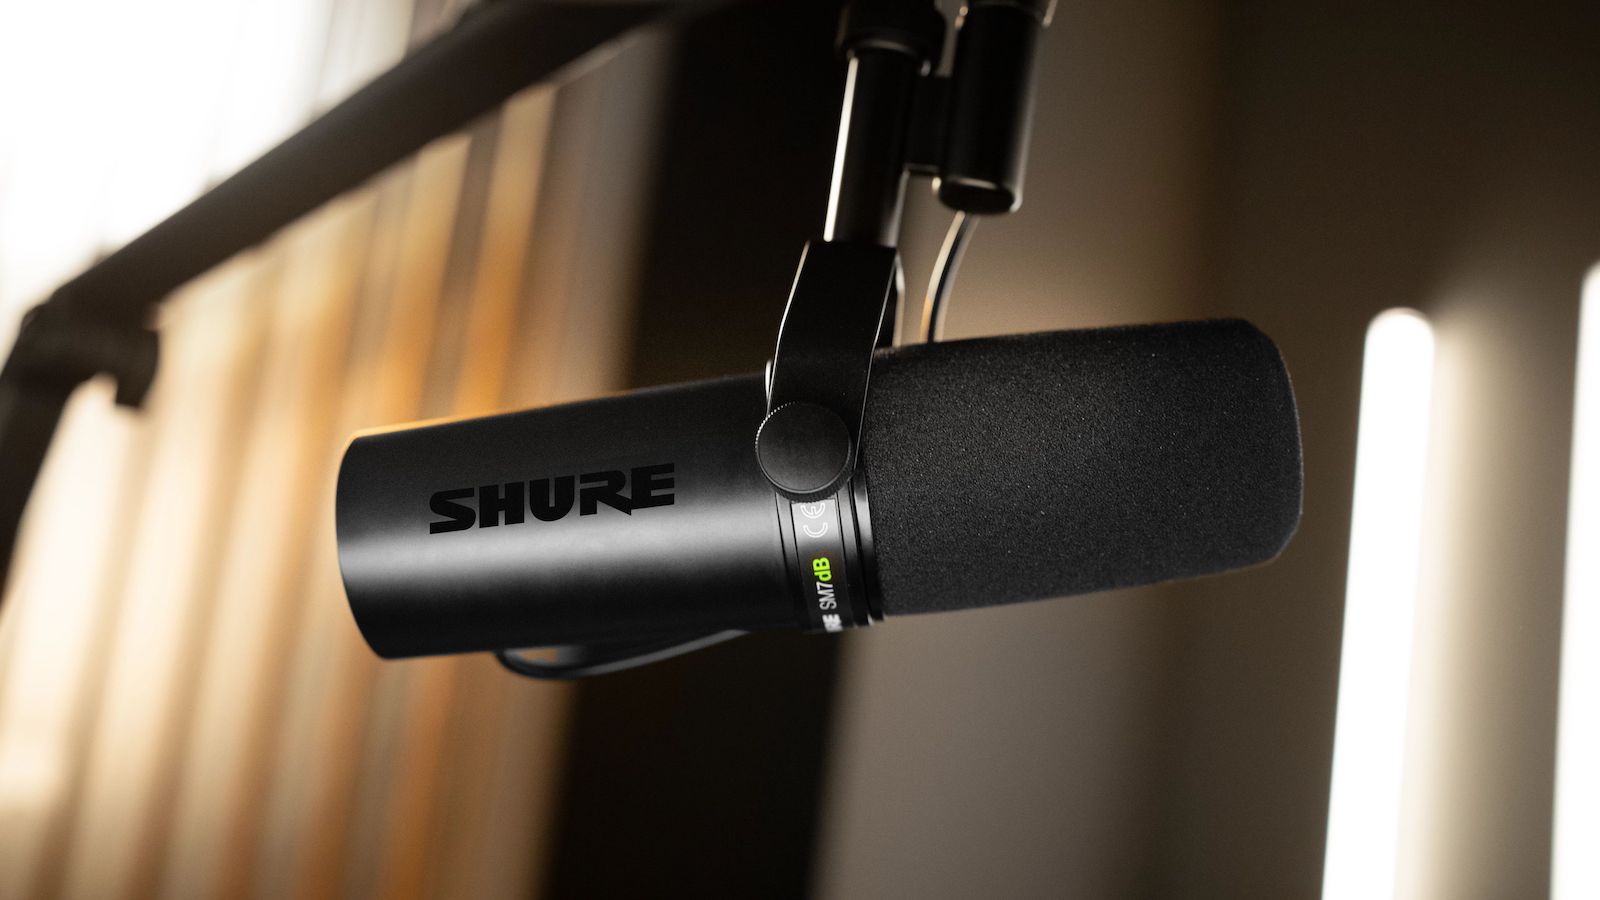 What's new about the Shure SM7dB?